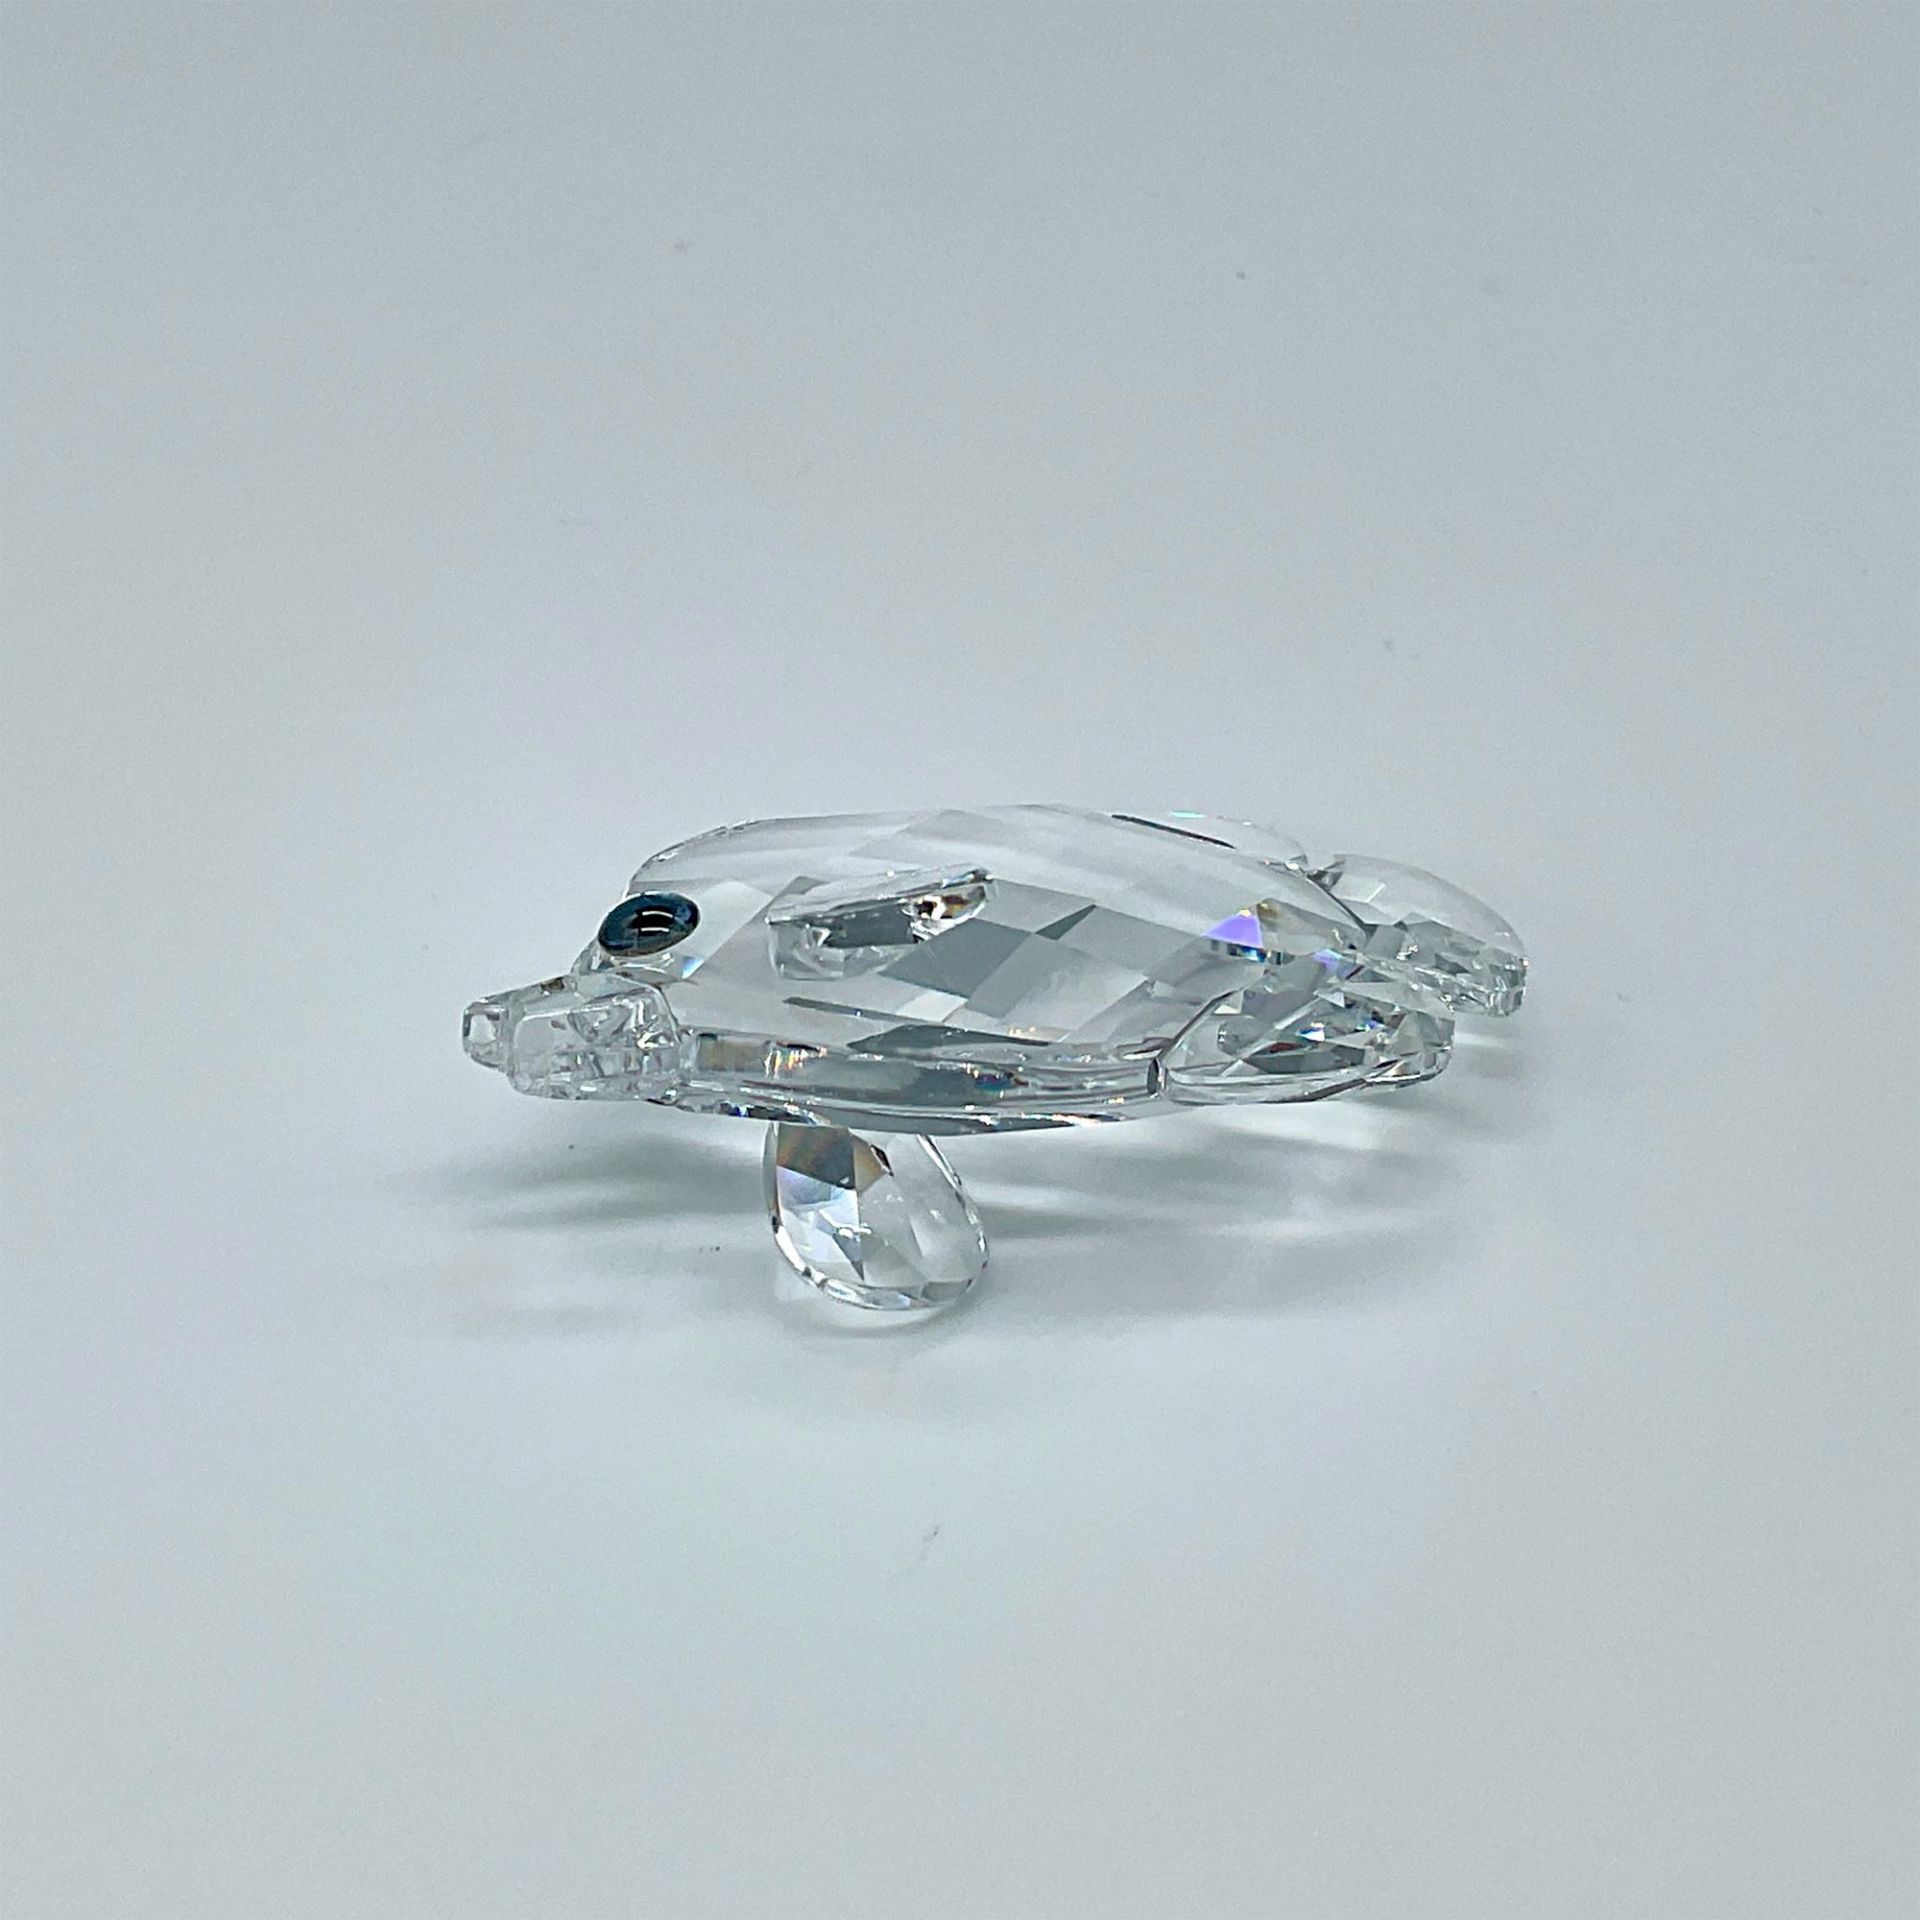 Swarovski Crystal Figurine, Small Butterfly Fish - Image 3 of 4